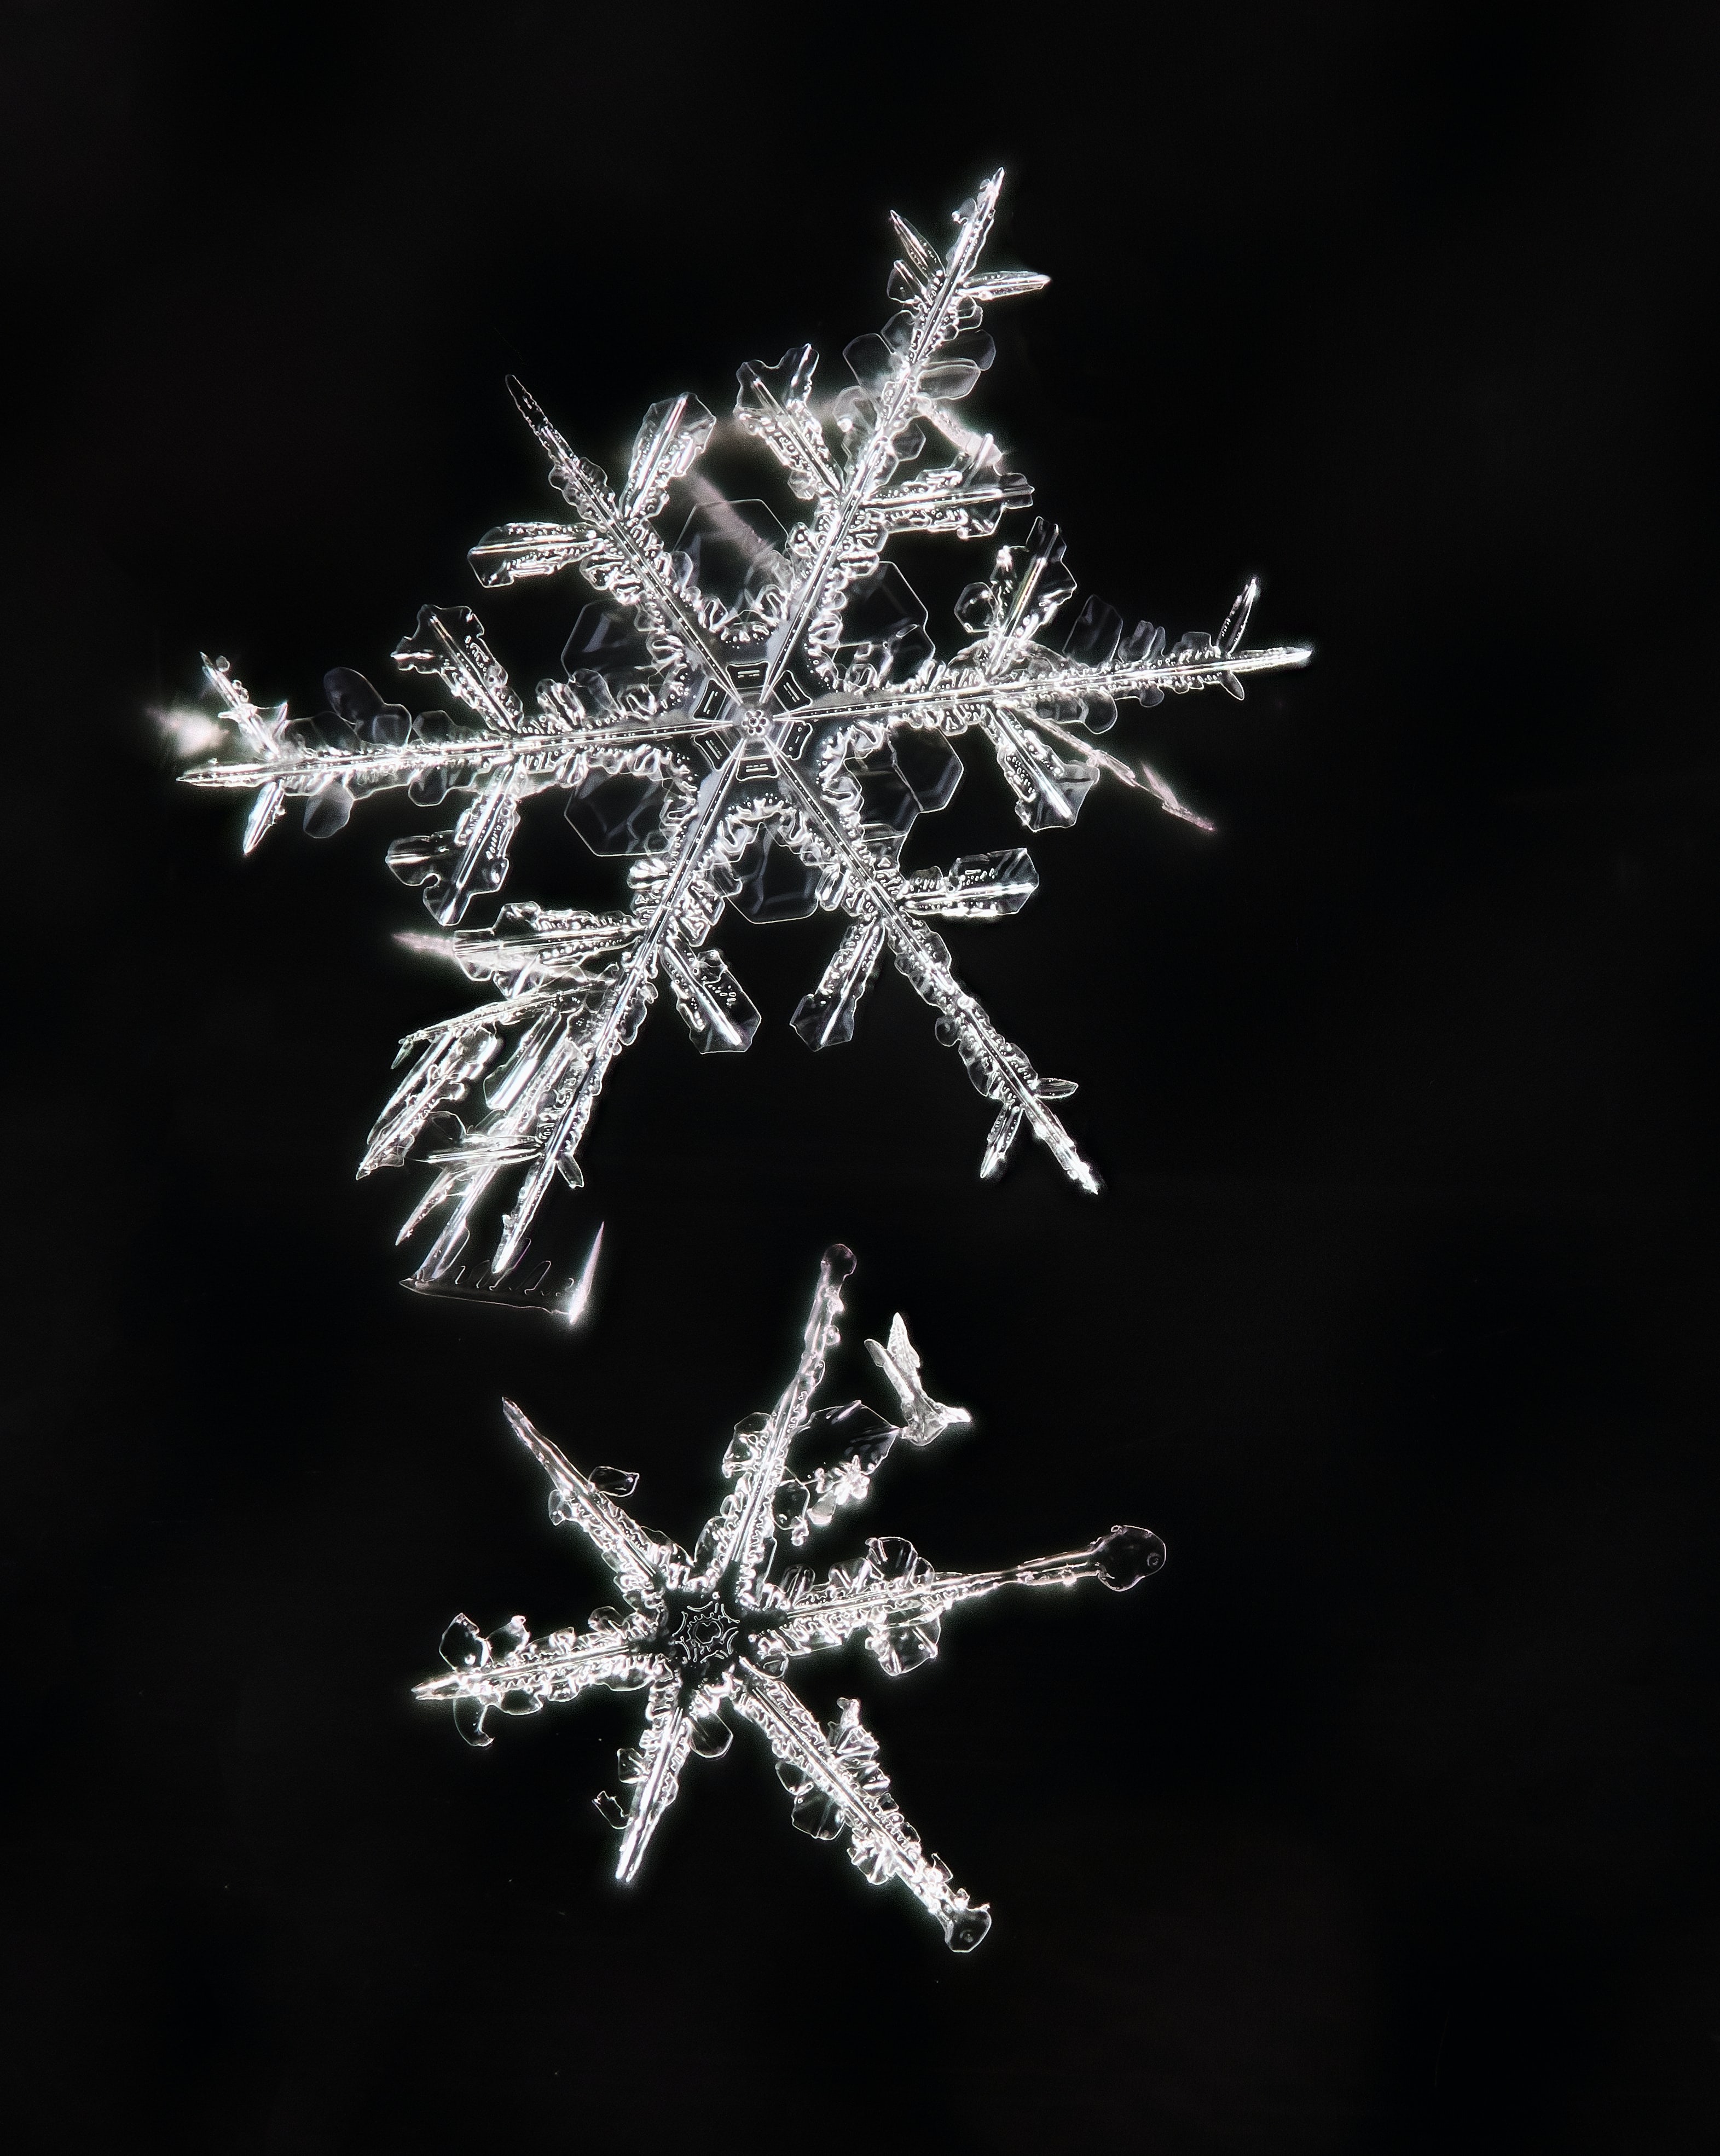 55921 Screensavers and Wallpapers Snowflakes for phone. Download ice, snowflakes, macro, pattern, crystal pictures for free